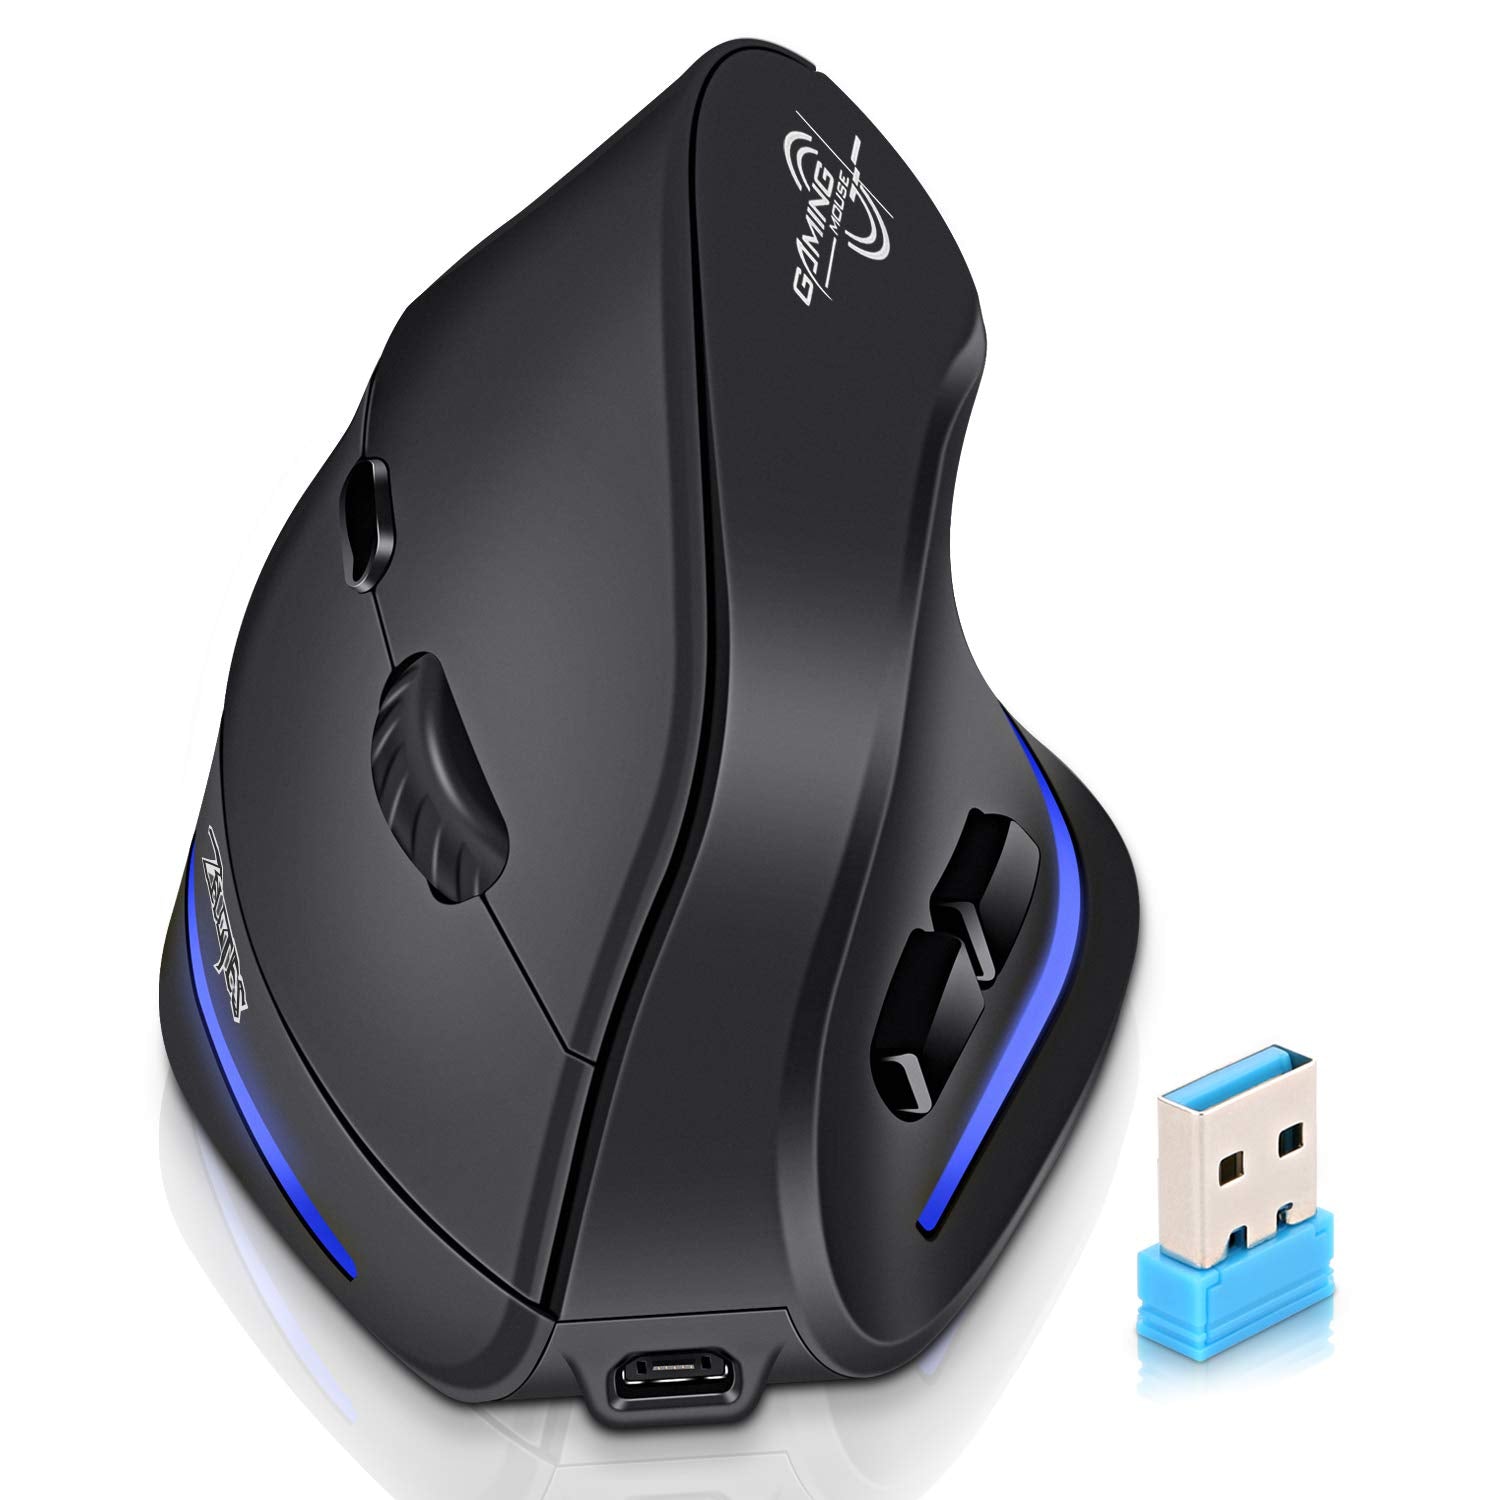 Vertical Ergonomic Mouse Wireless,ECHTPower Rechargeable 2.4G Optical USB Mouse for Laptop/Desktop/PC/Macbook with 1000/1600/2400 DPI,6 Buttons(Wireless Mouse)